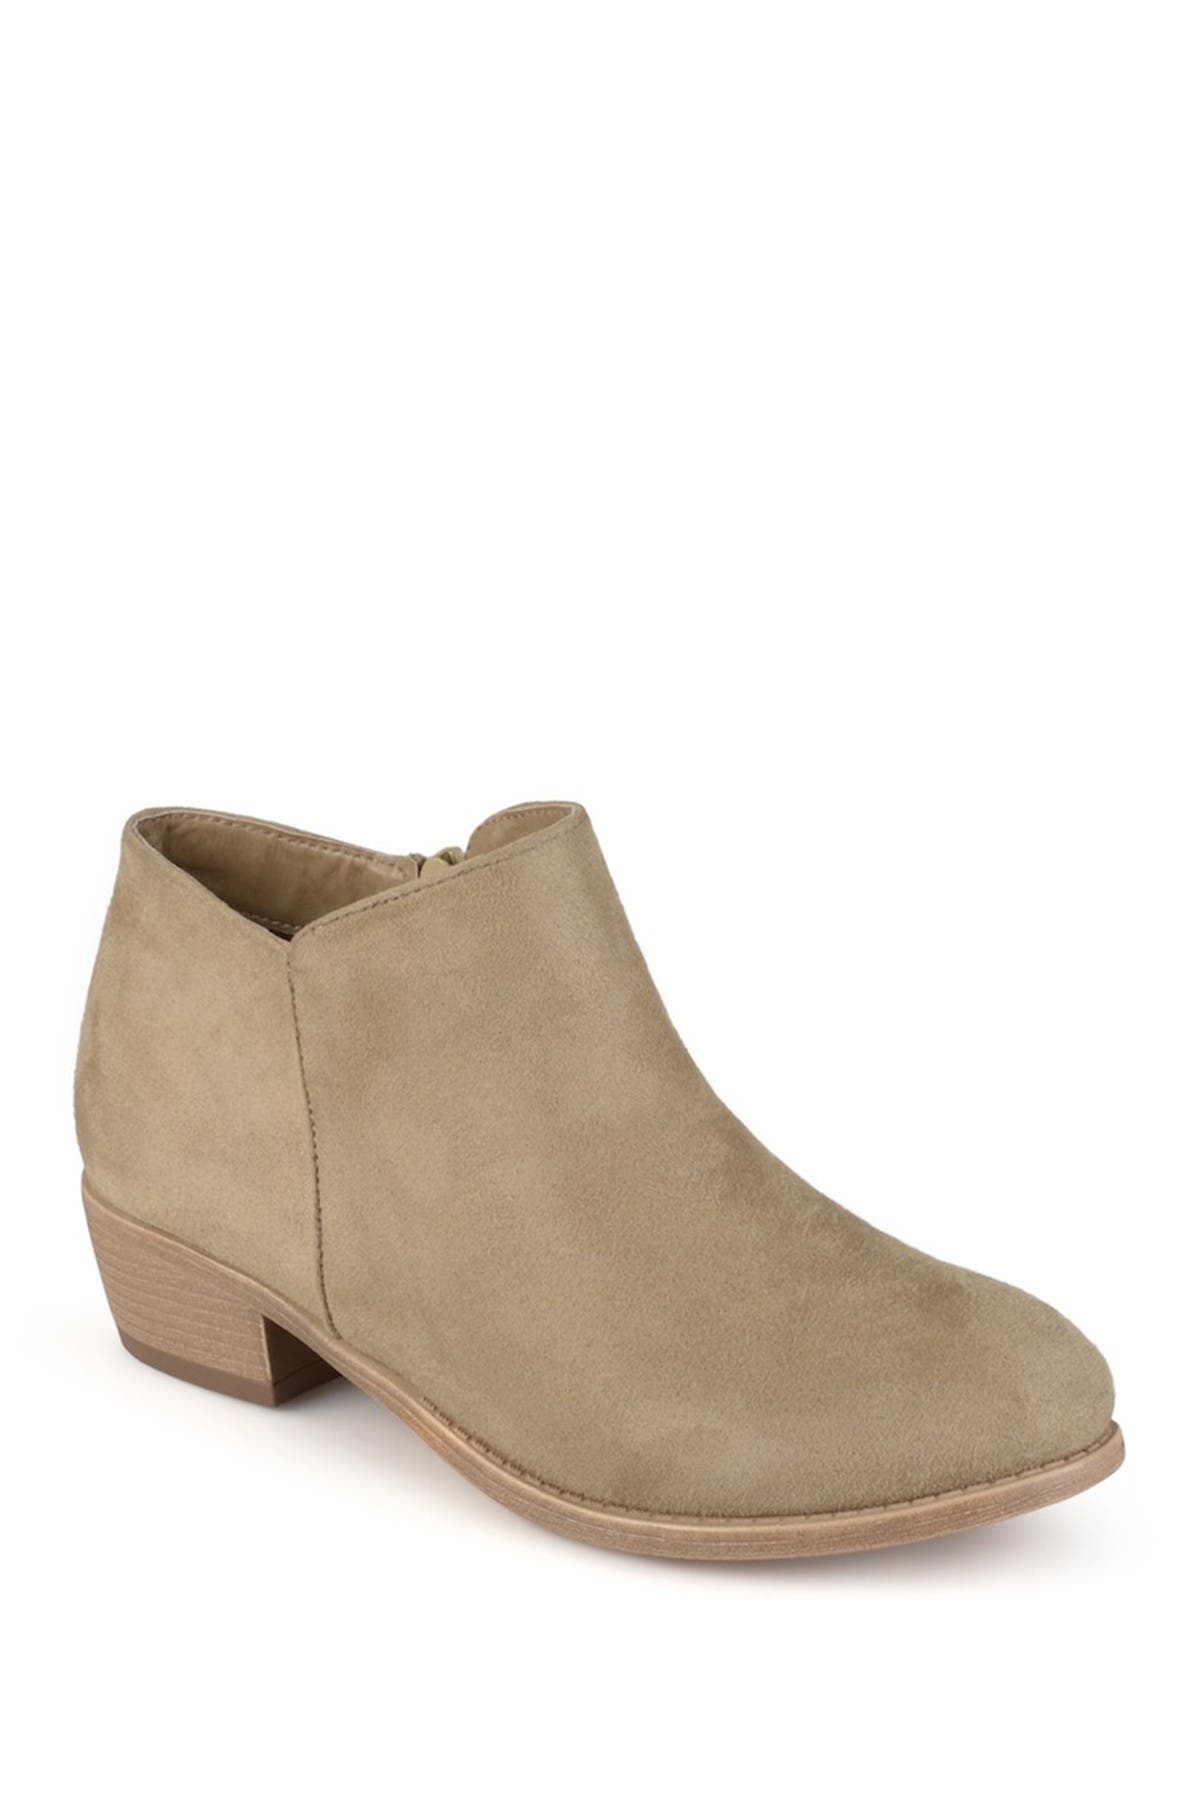 wide width ankle booties